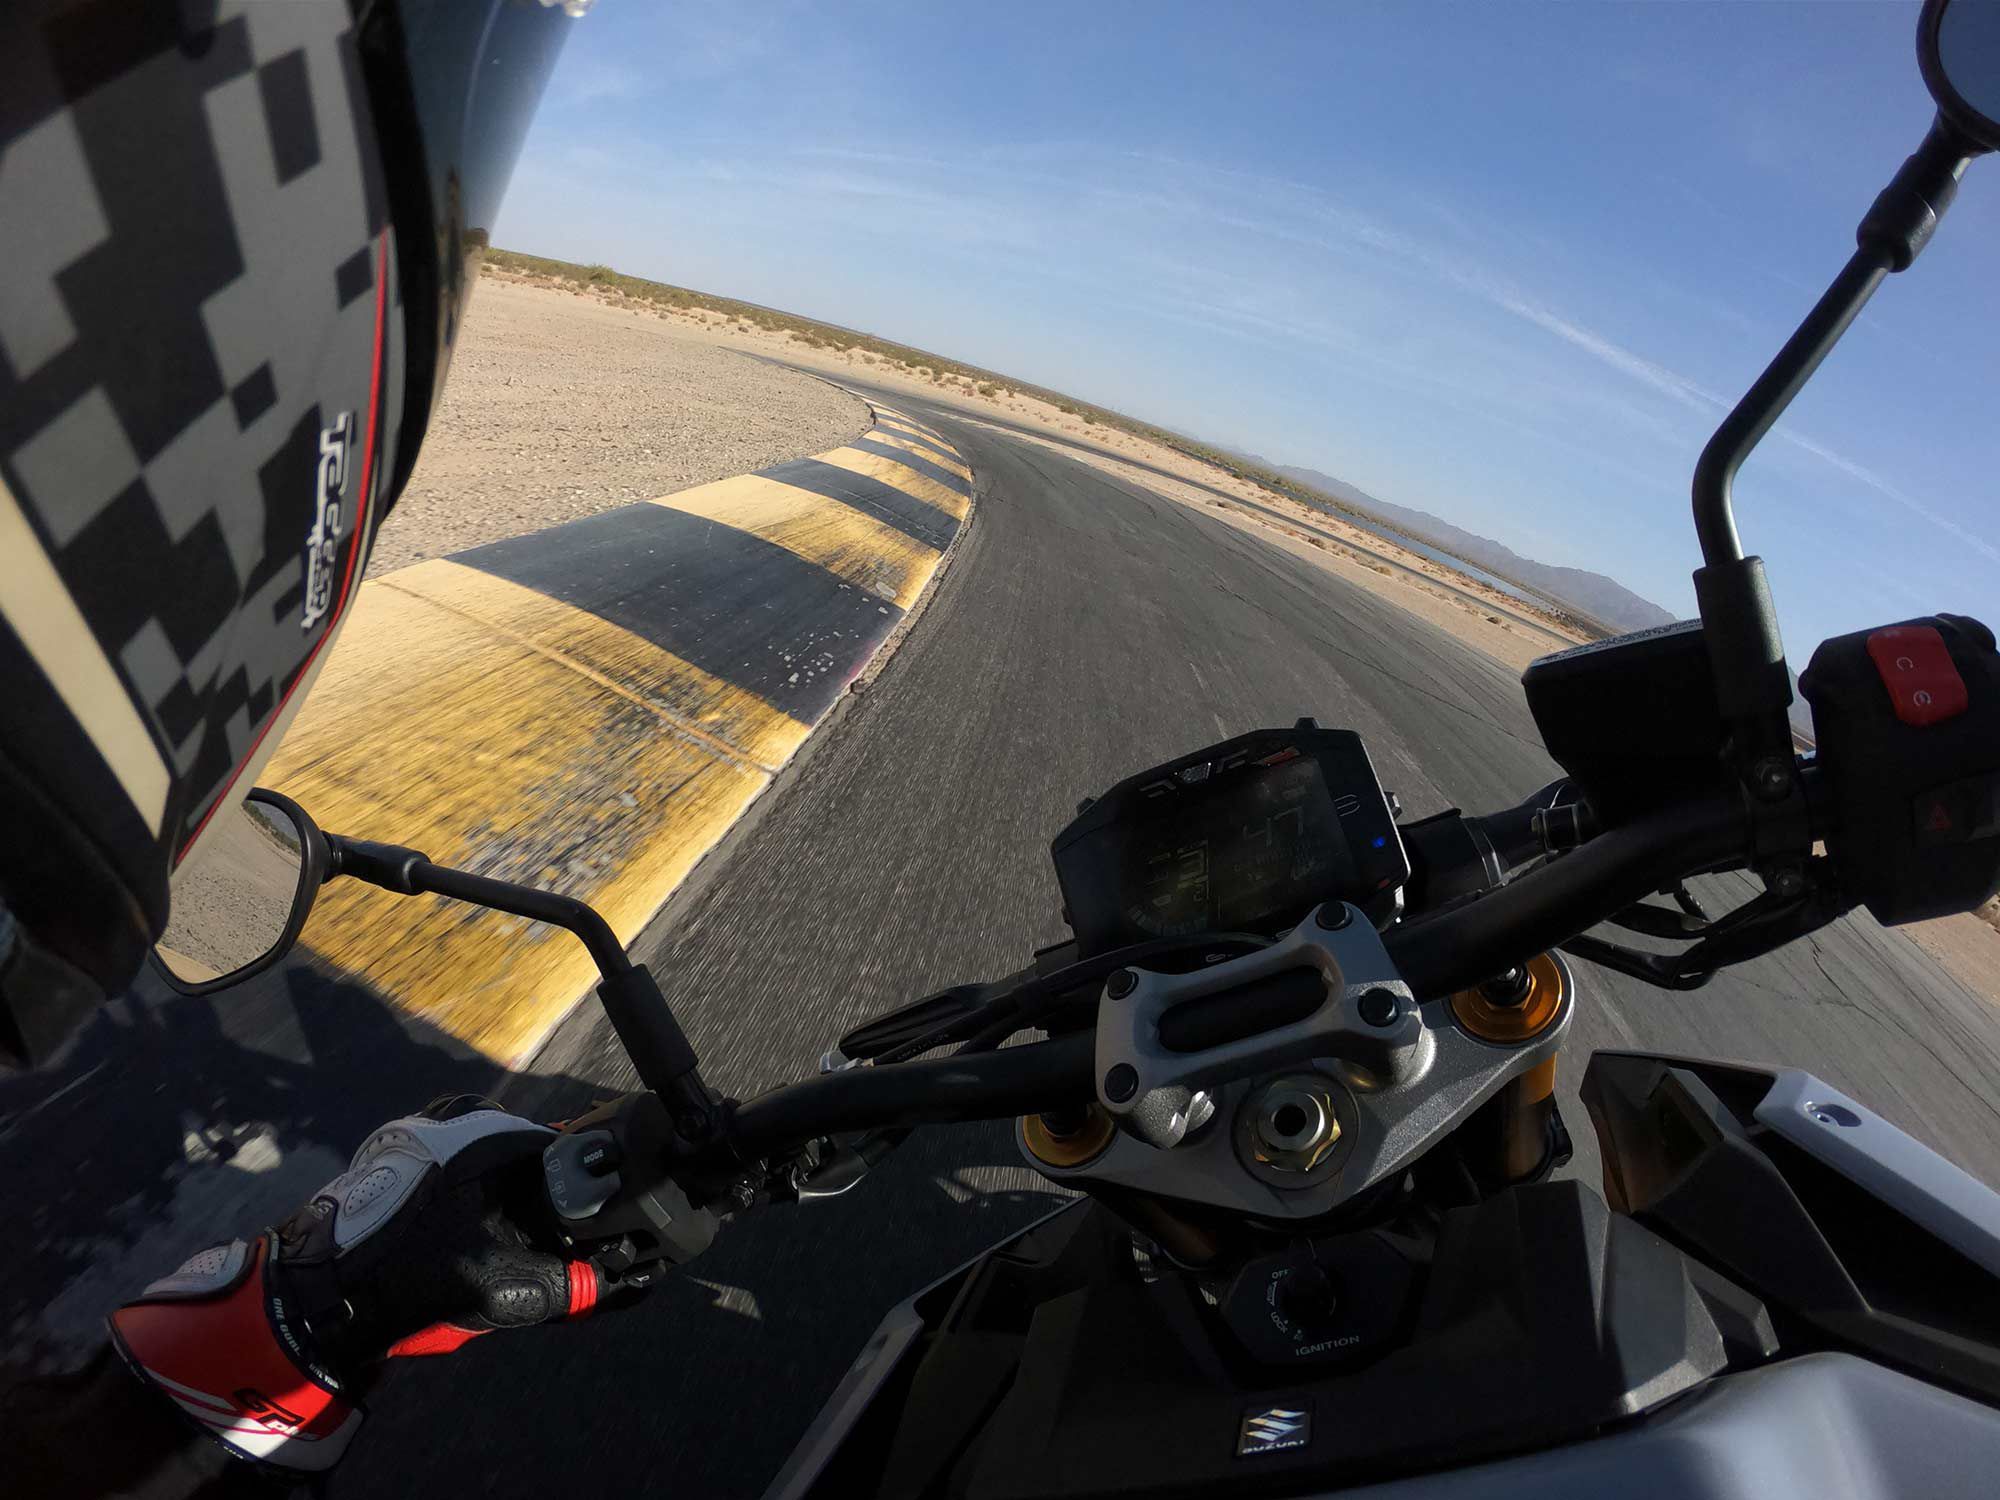 Suzuki’s GSX-S1000 happily does it all and is perfectly capable of track duty.